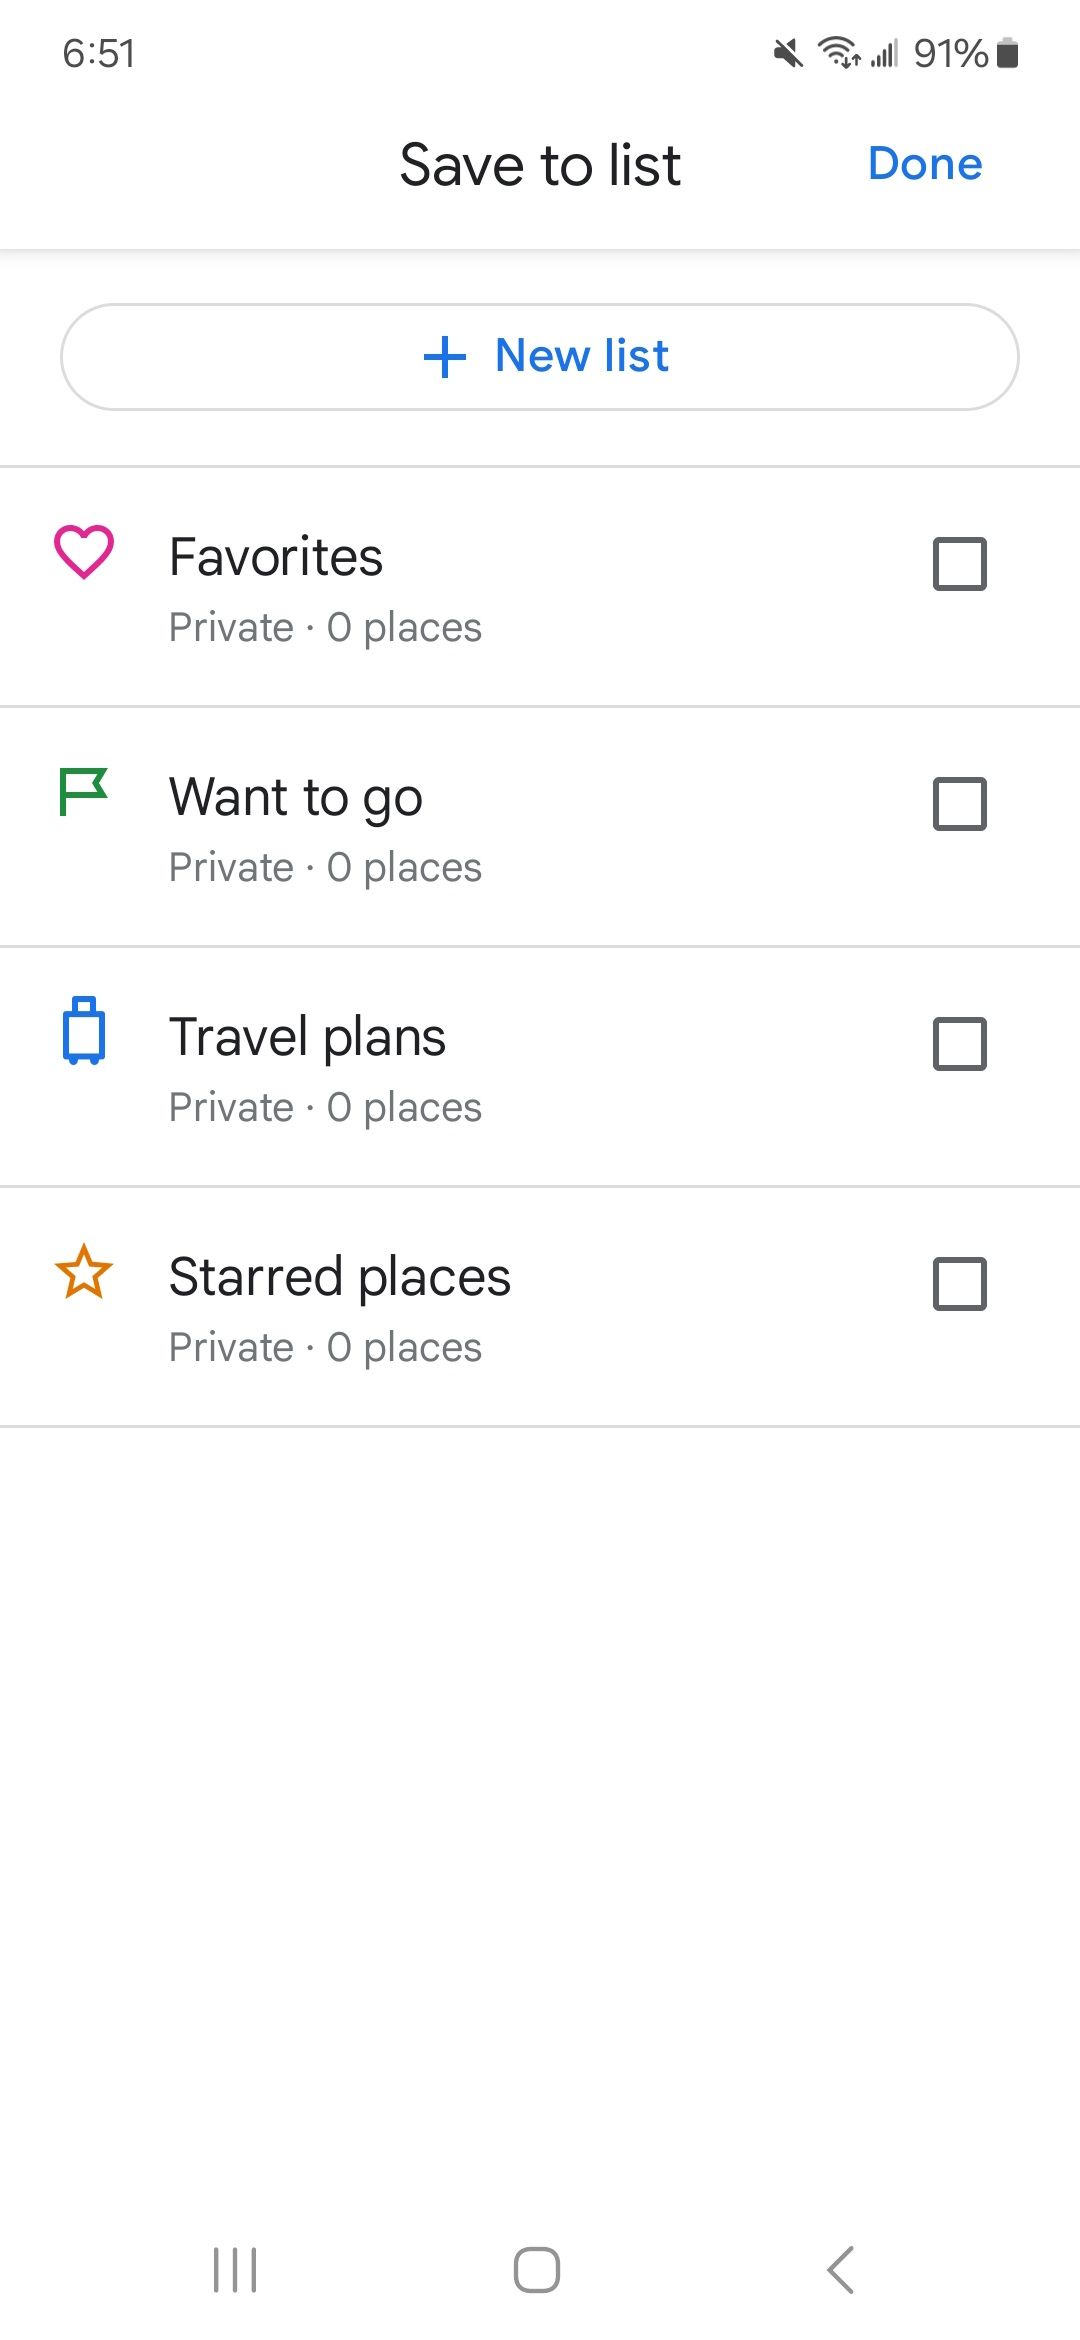 list of save to list options in google maps app